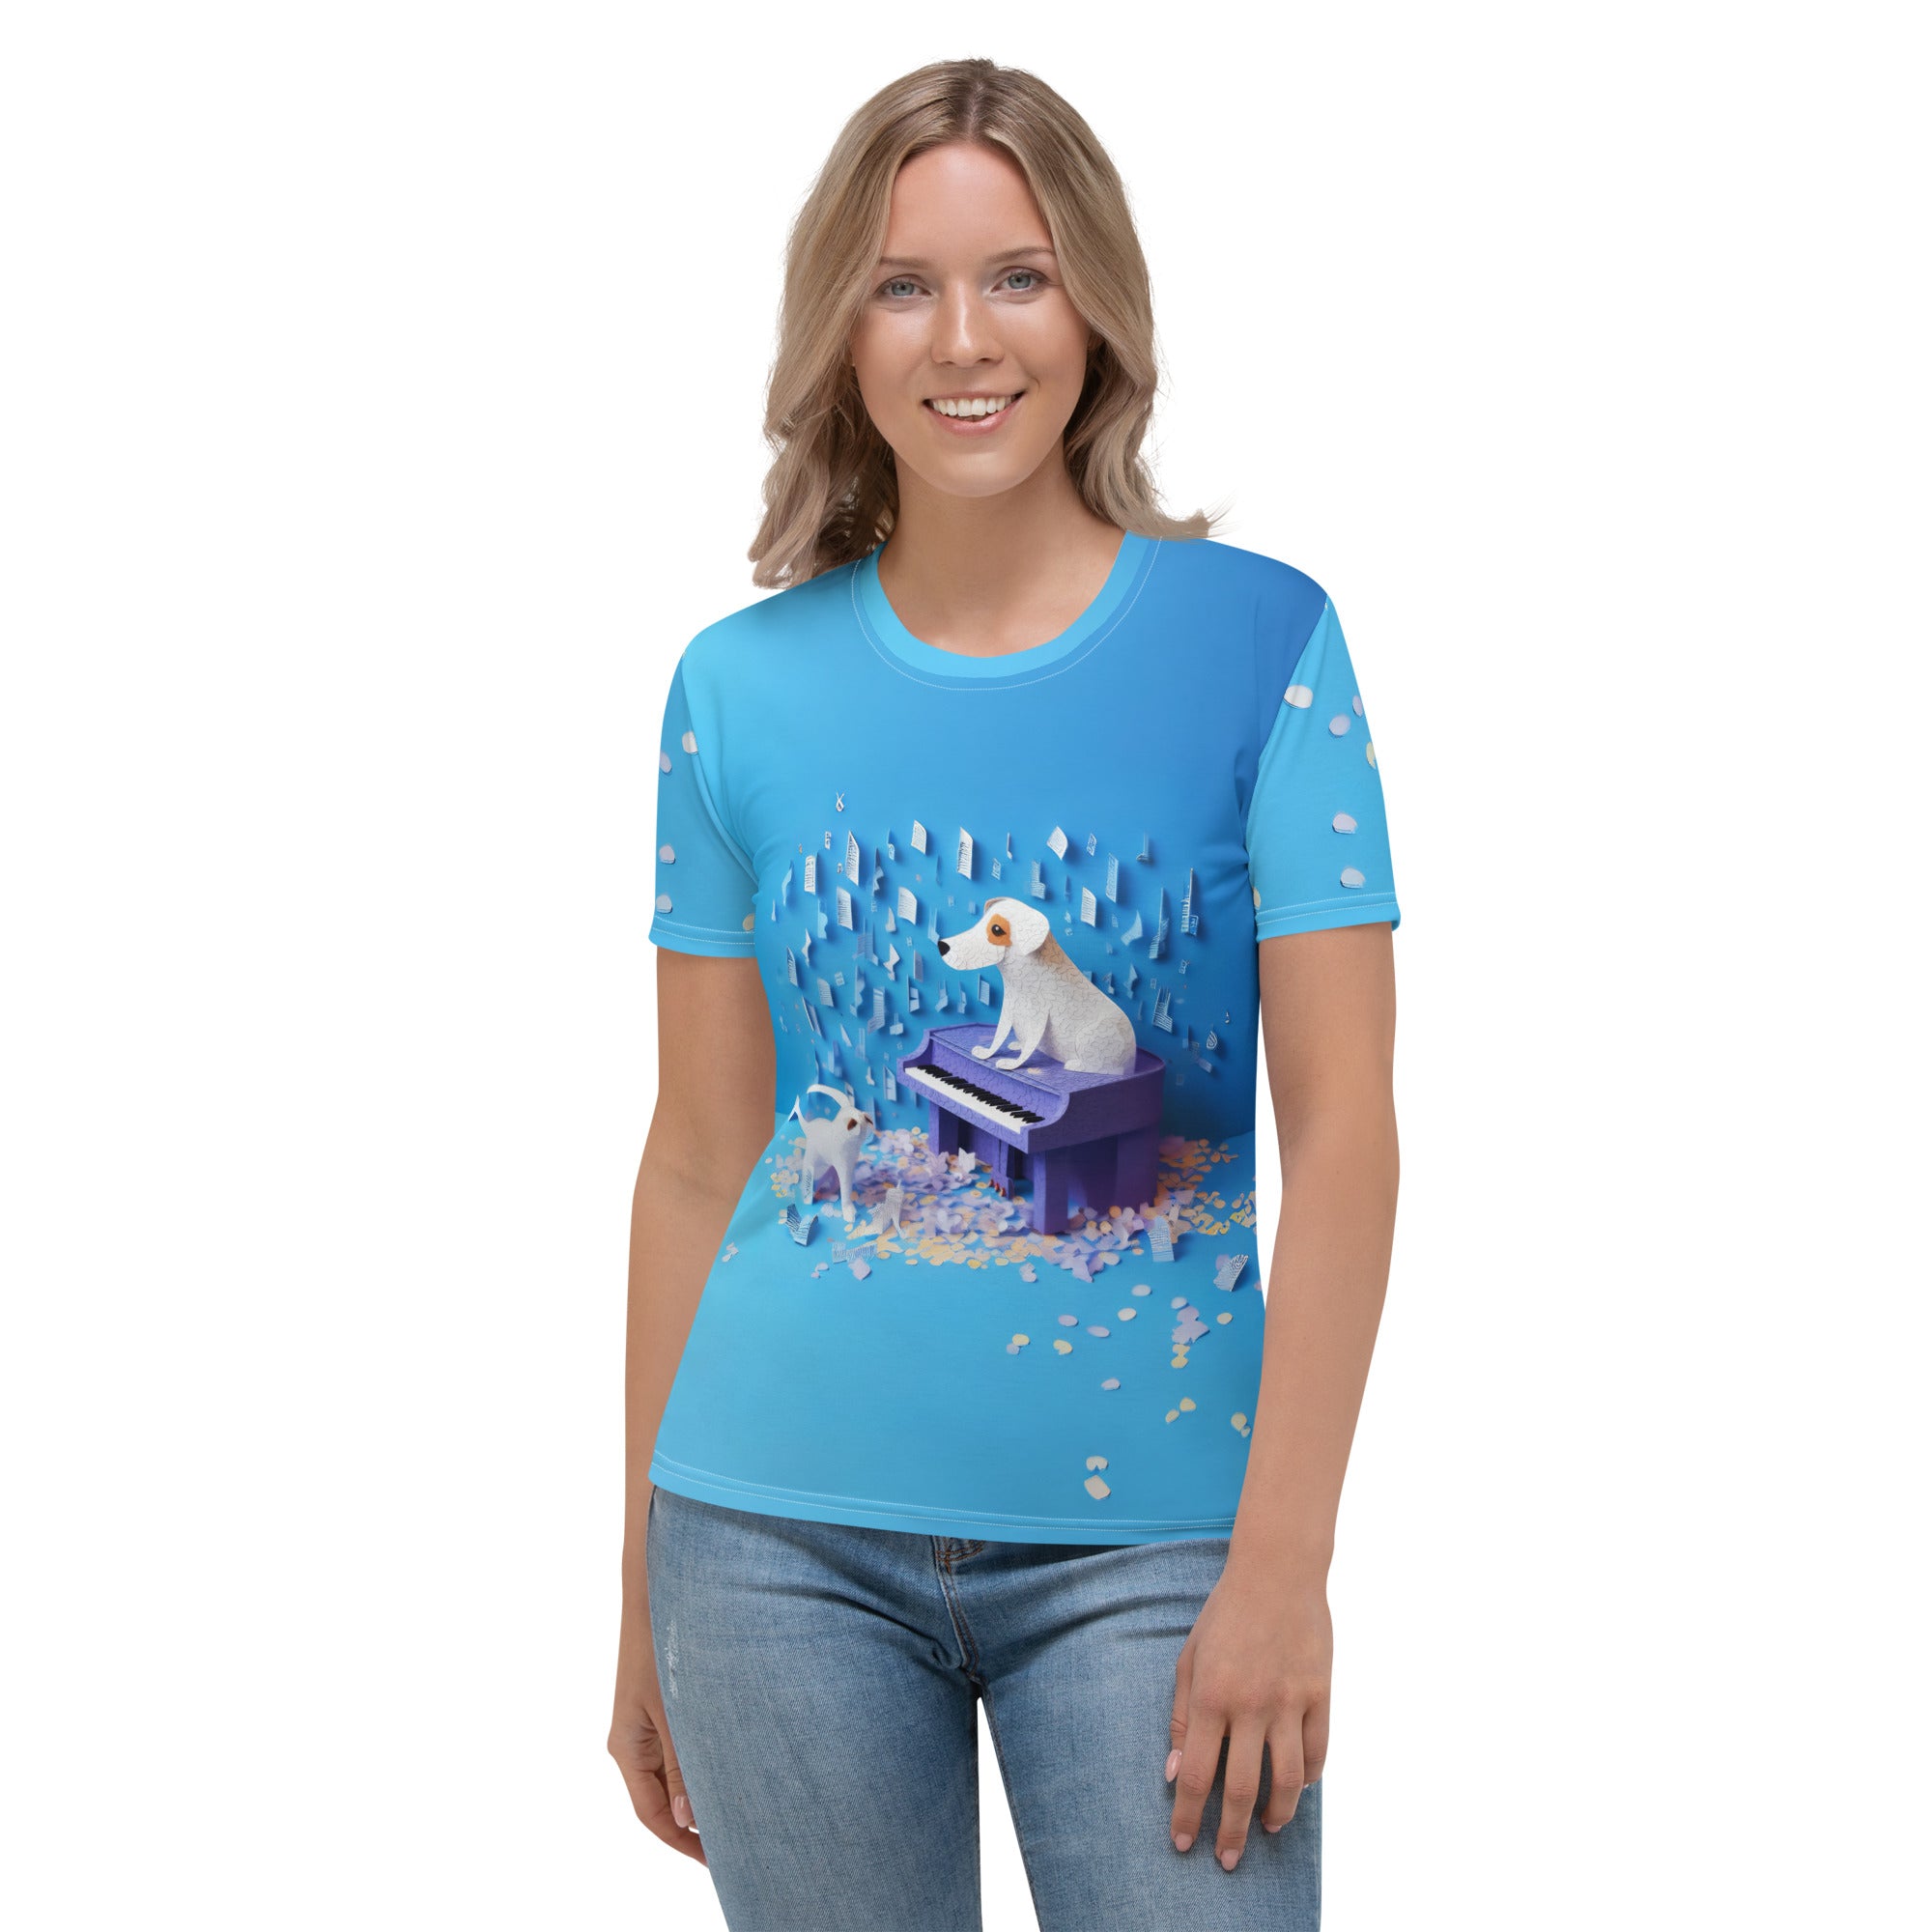 Cascading Waterfall Serenity women's crew neck T-shirt with waterfall design.